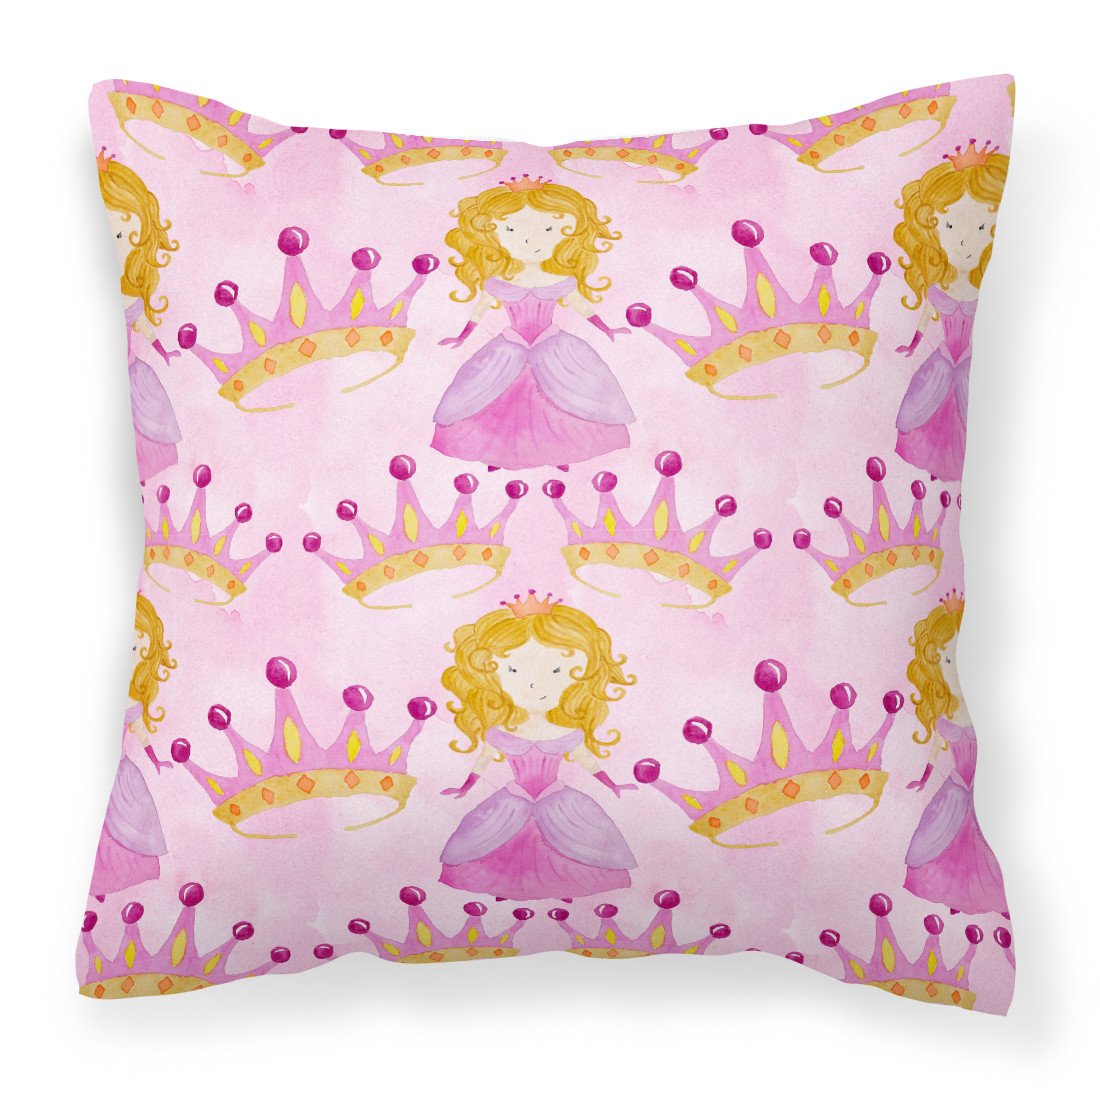 Watercolor Princess and Crown Fabric Decorative Pillow BB7551PW1818 by Caroline's Treasures